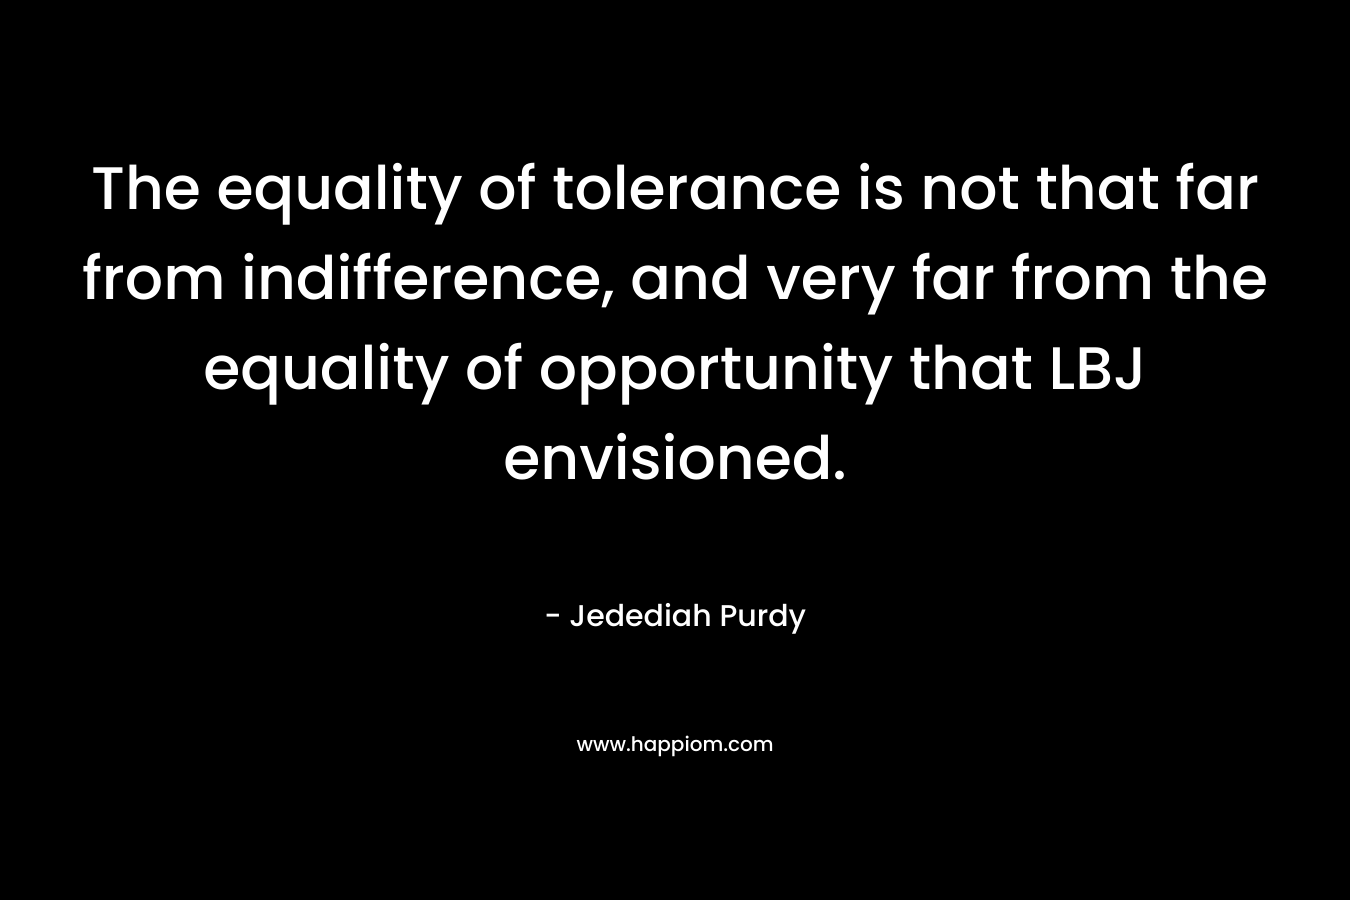 The equality of tolerance is not that far from indifference, and very far from the equality of opportunity that LBJ envisioned.